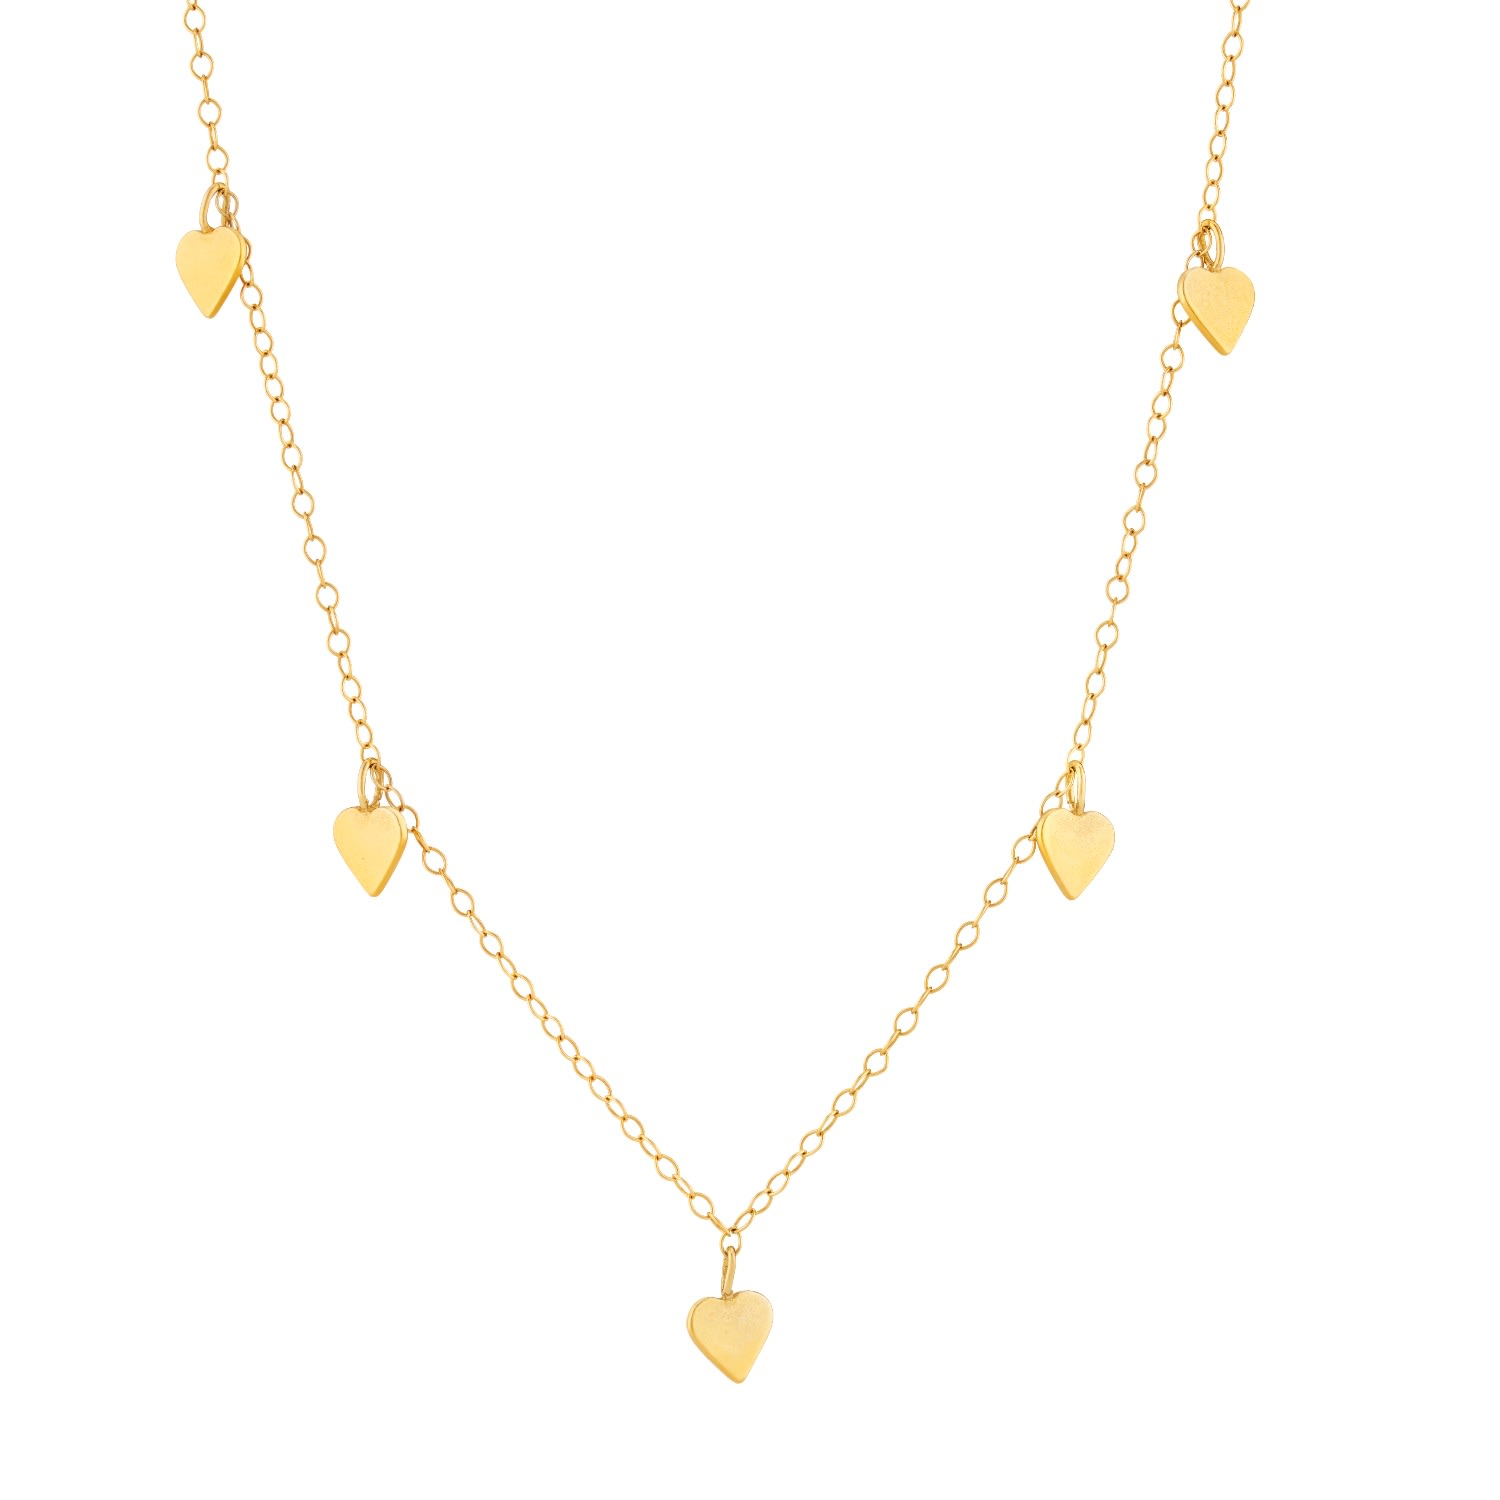 Women's Yellow Gold Plated Heart Station Necklace Posh Totty Designs